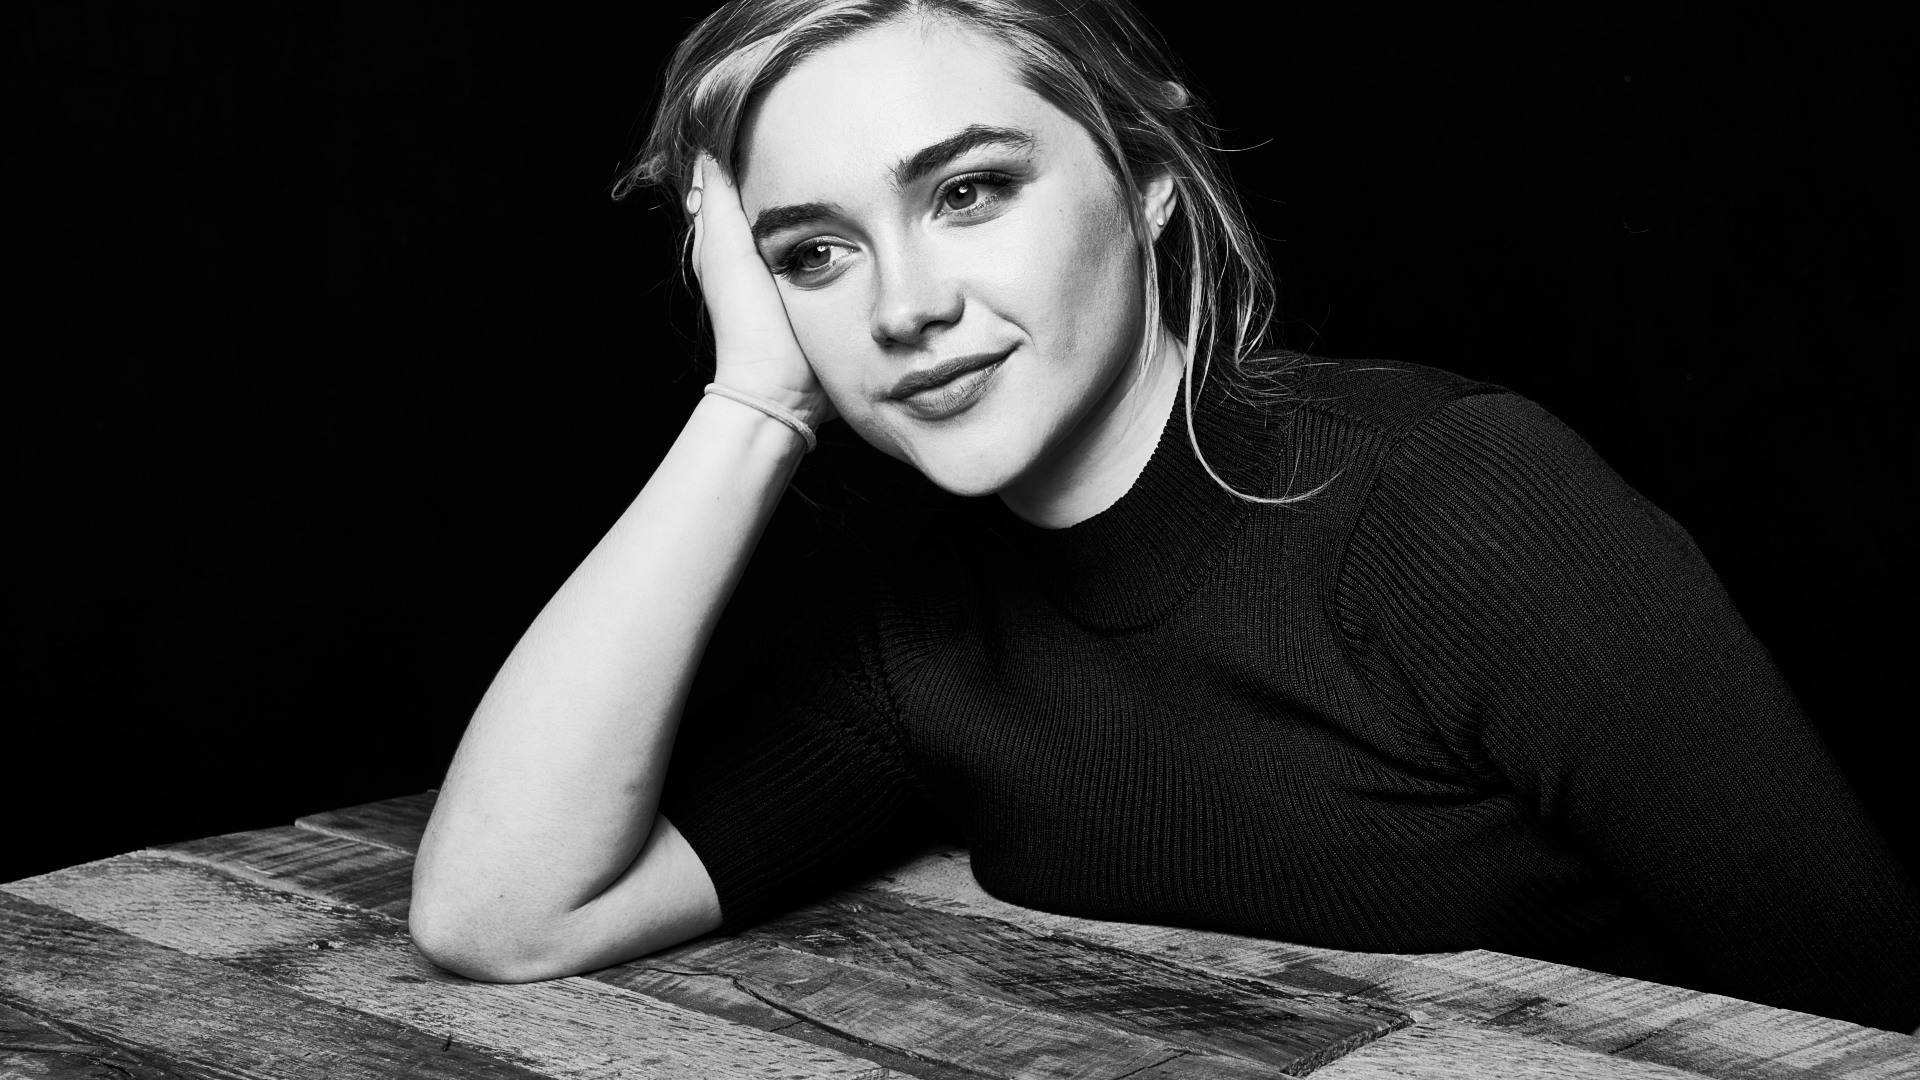 A black and white photo of a woman sitting at a table - Florence Pugh